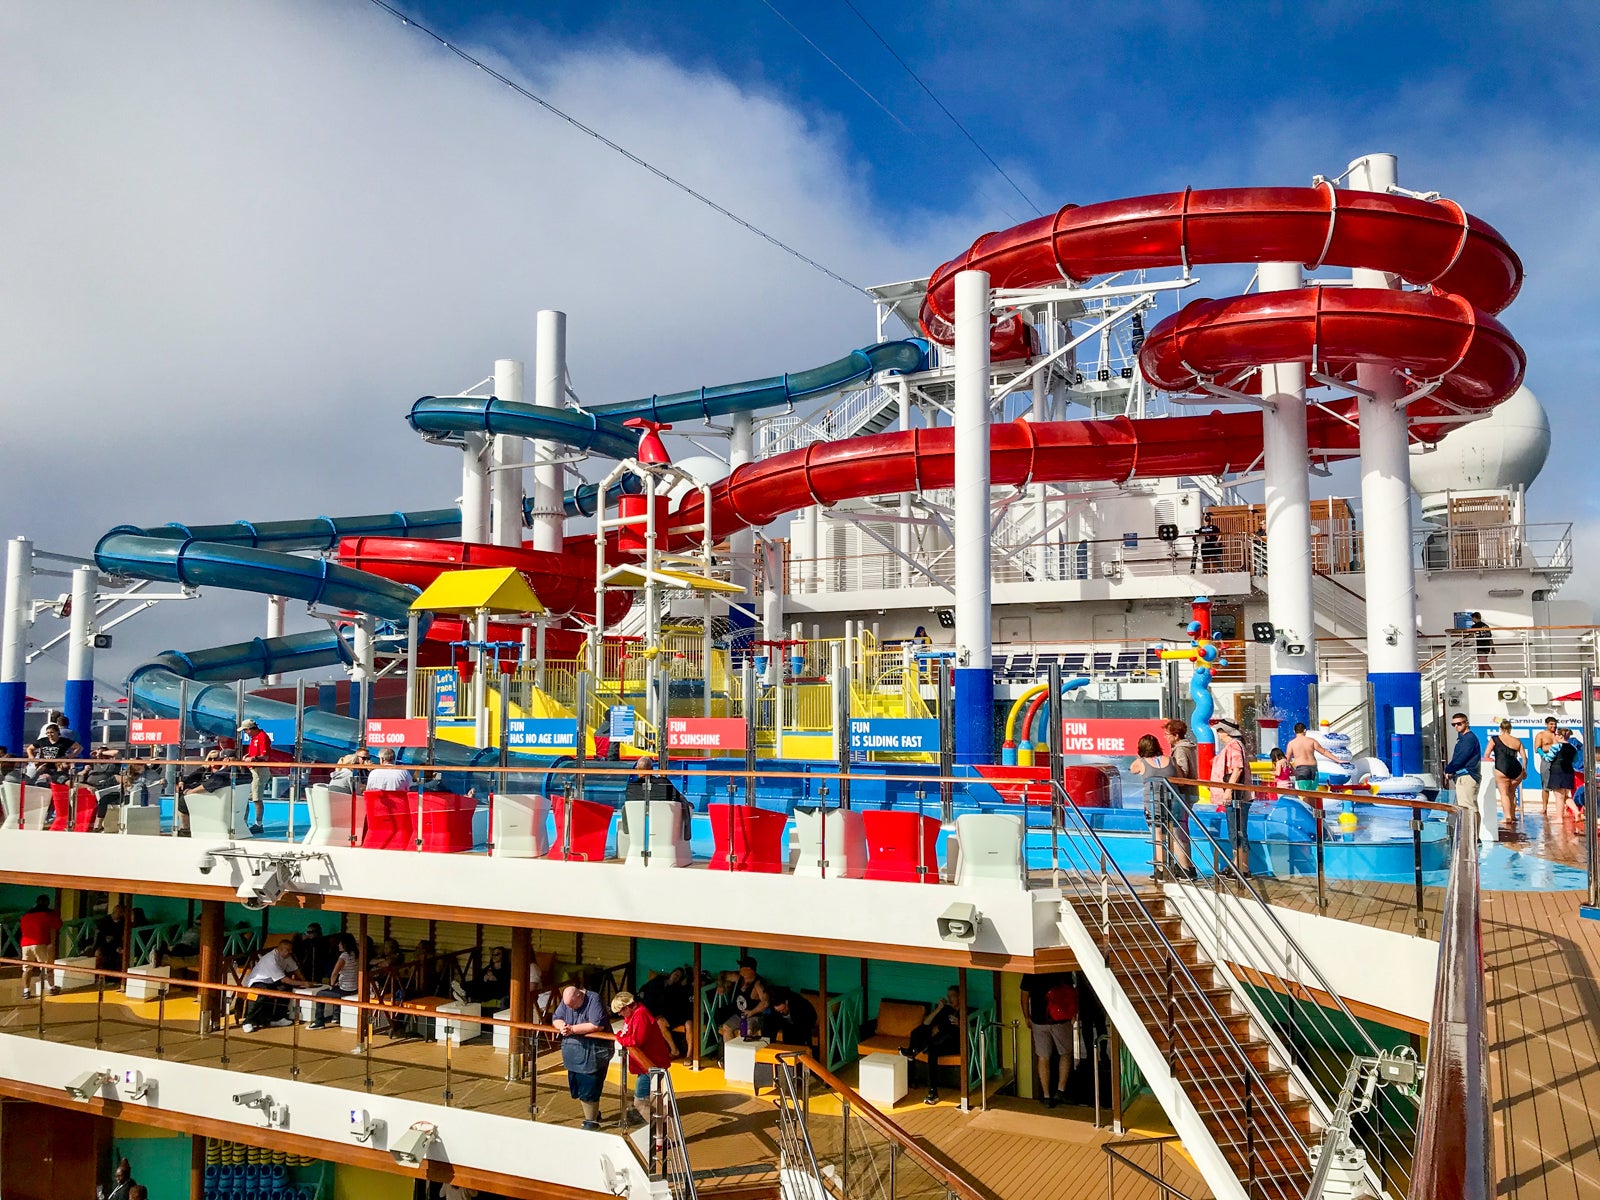 waterslides on Carnival cruise ship